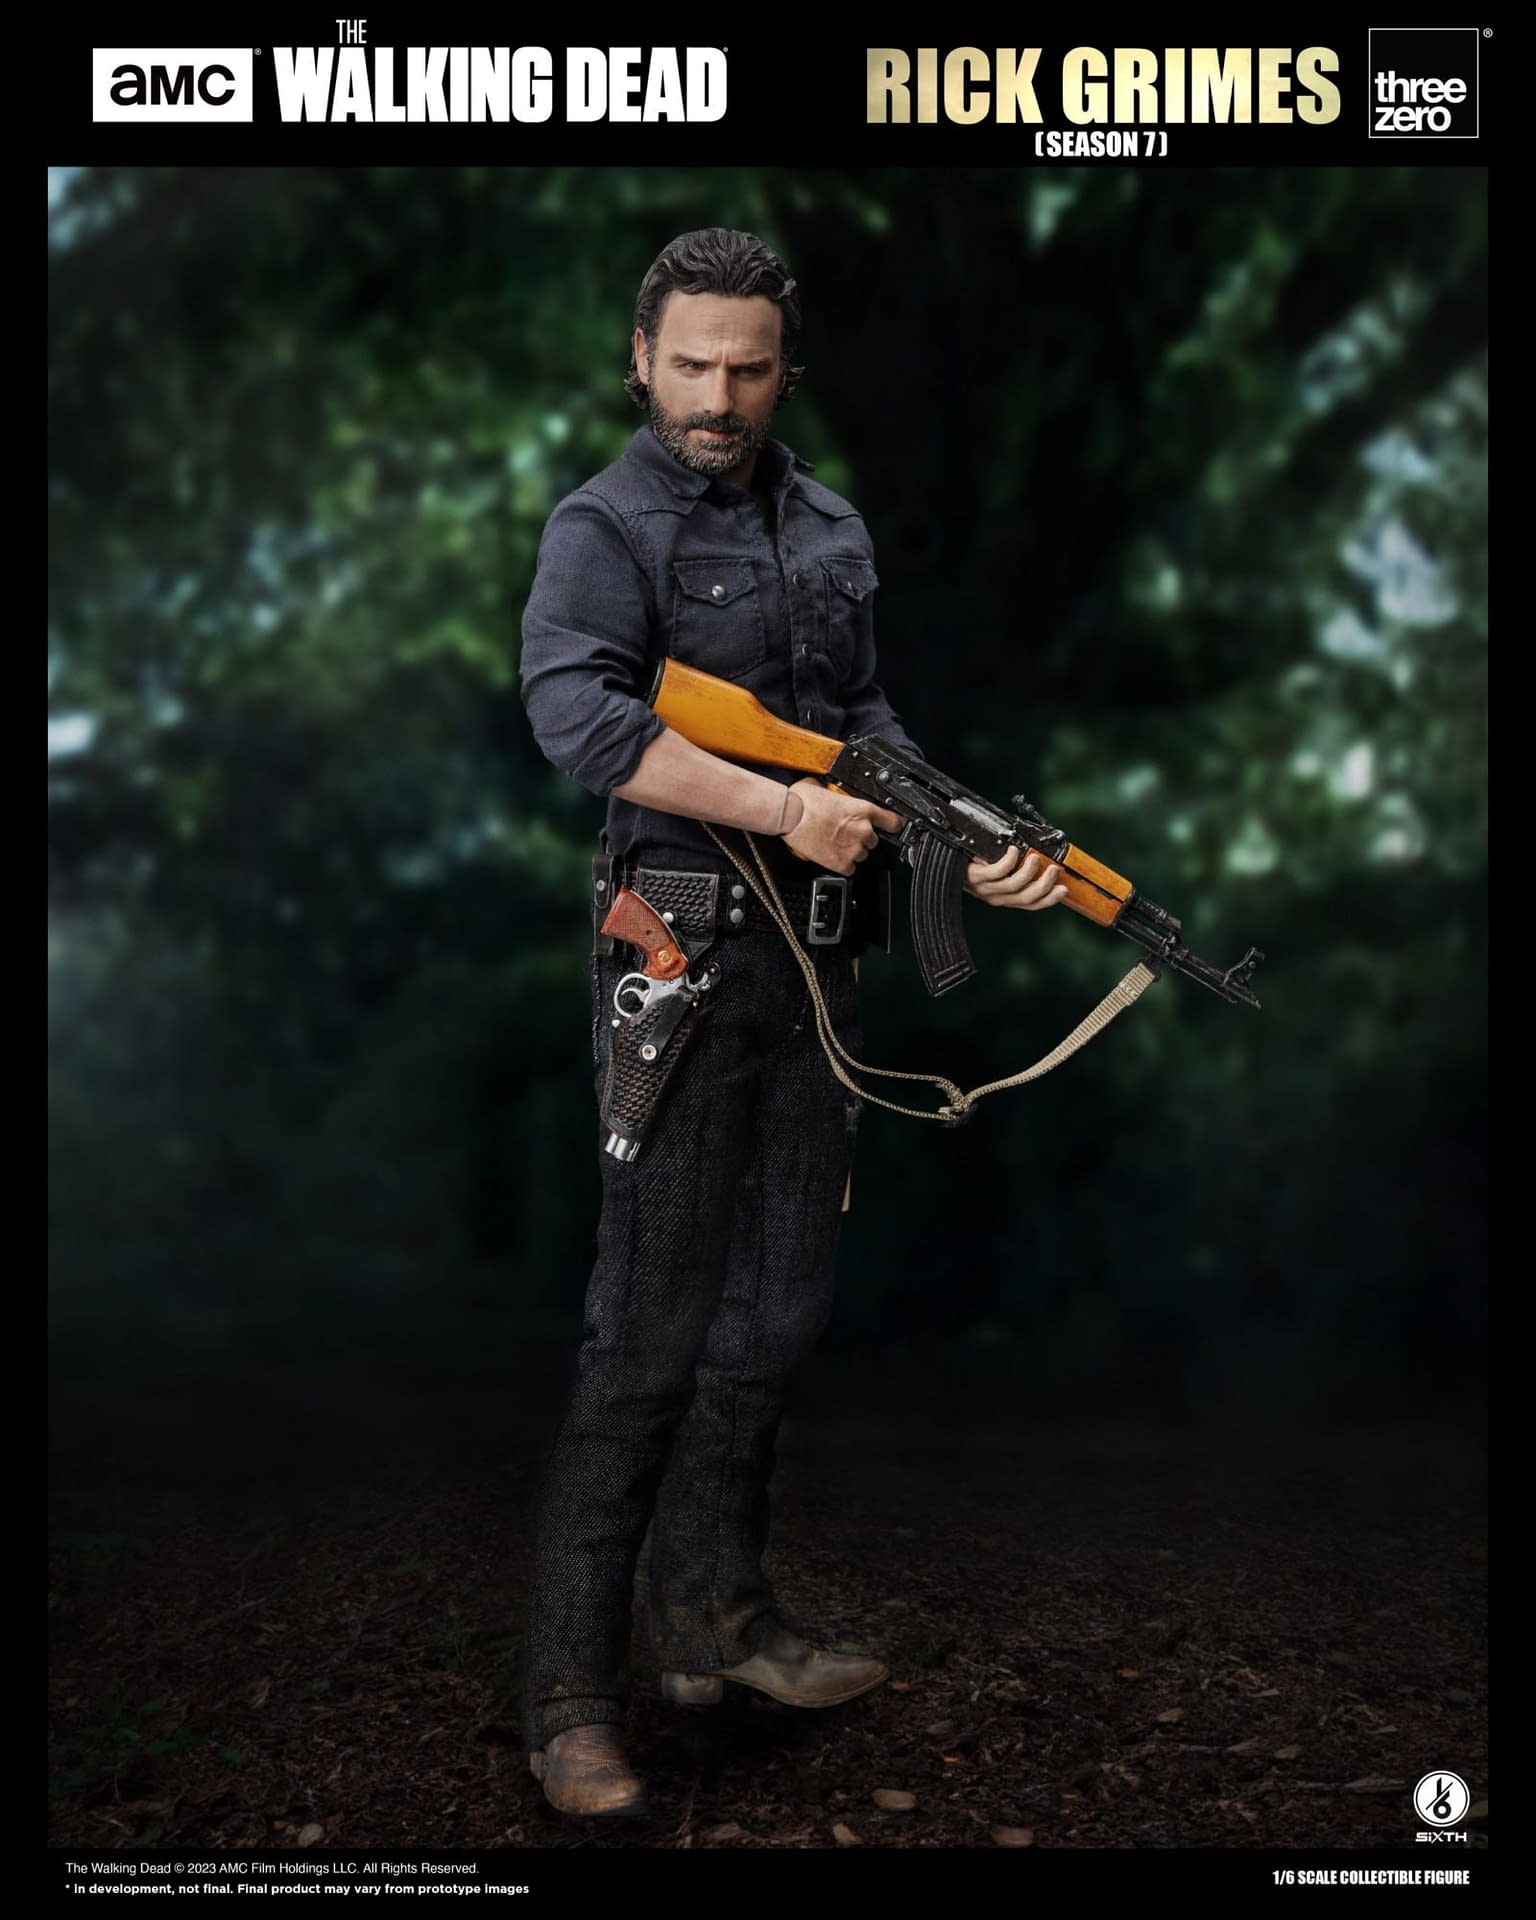 The Walking Dead Collectibles, Comics, Figures, Cards, More